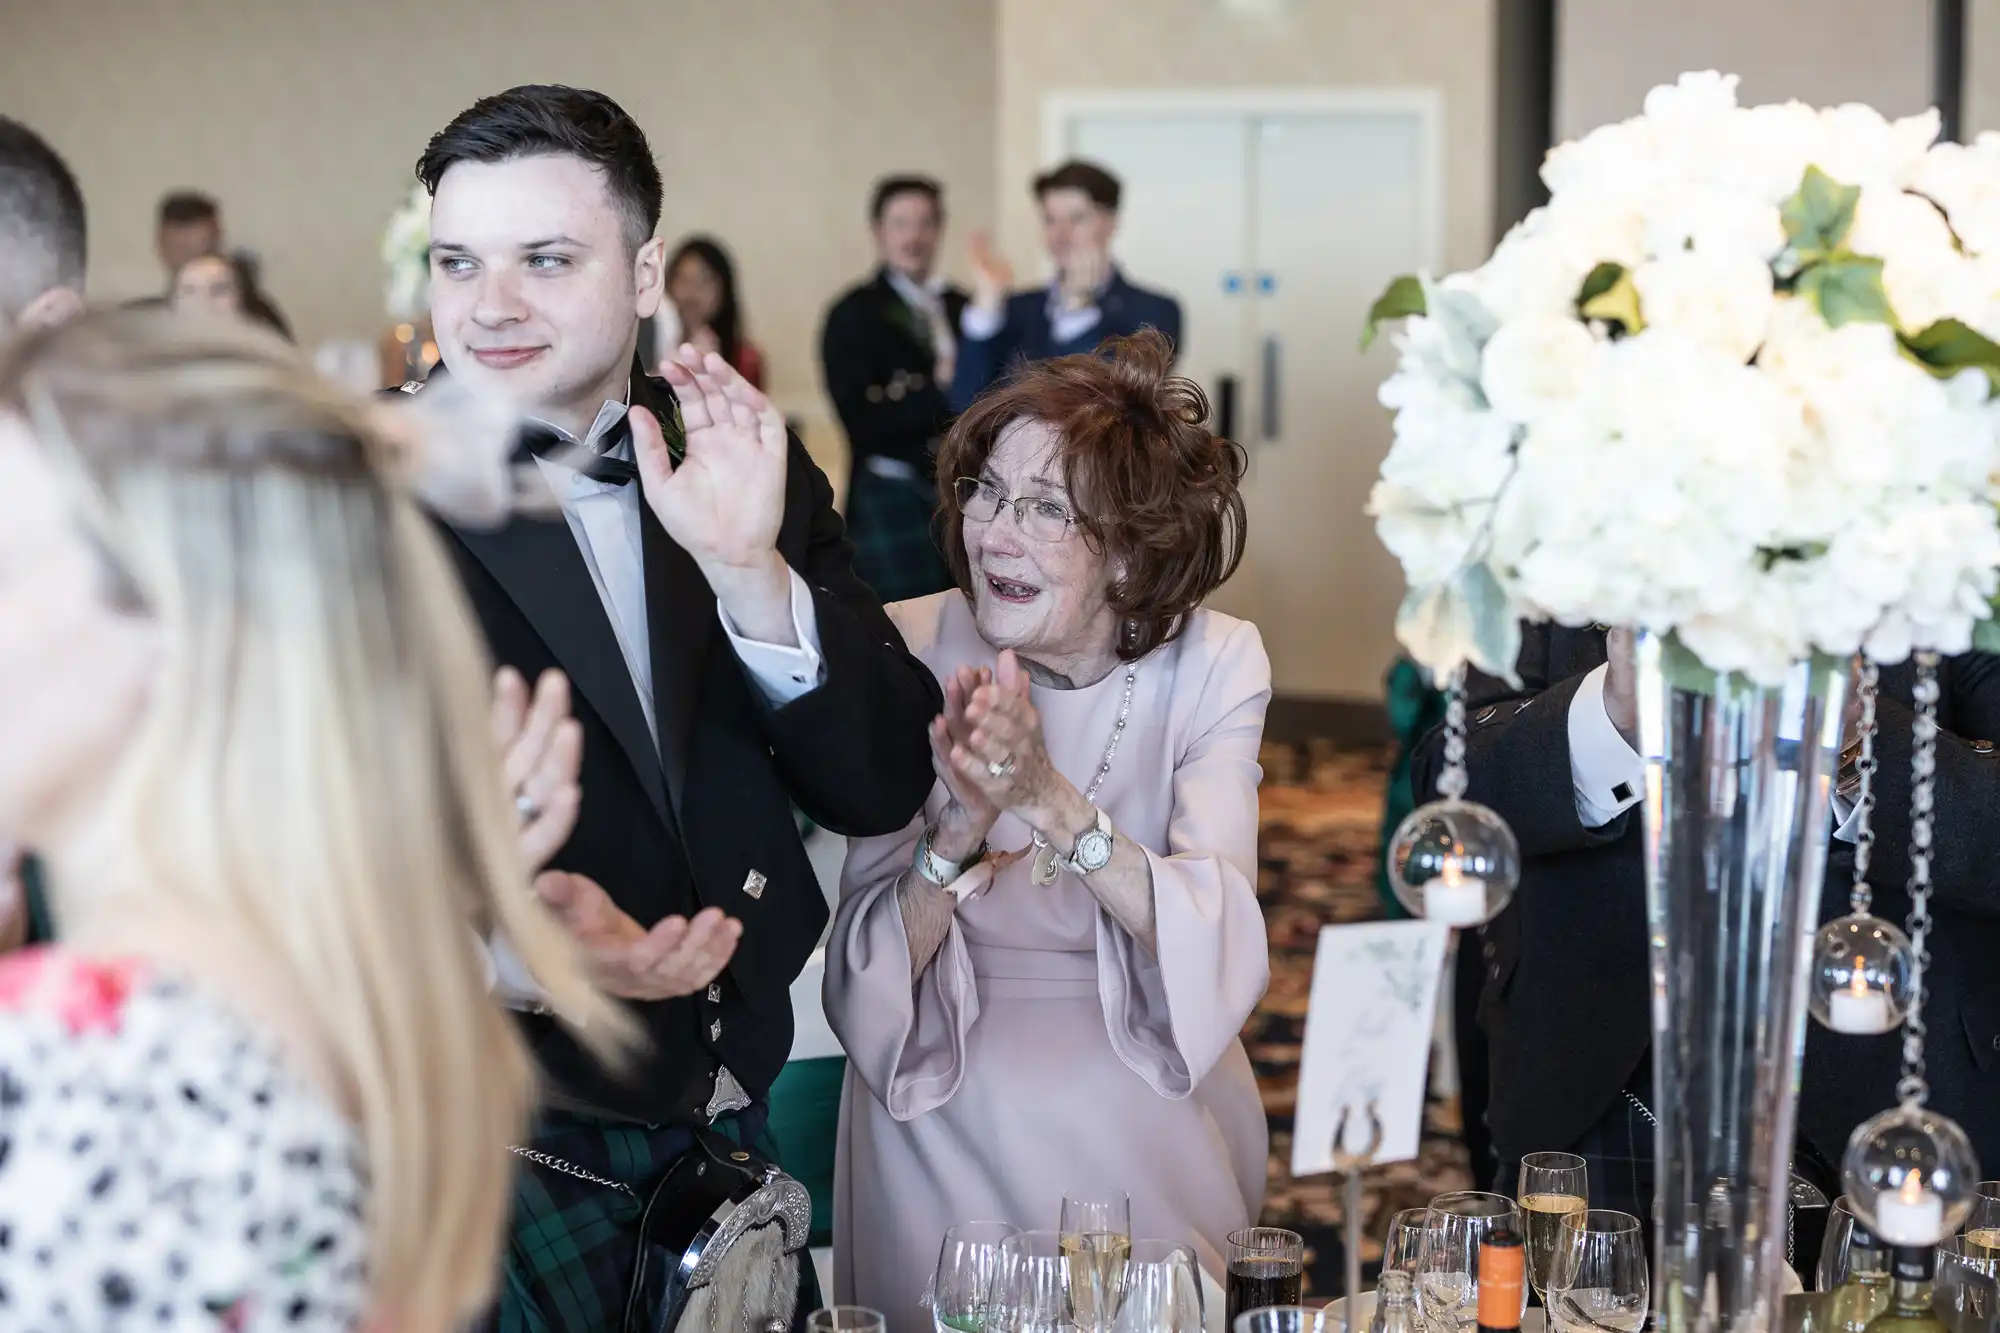 A young man in a kilt and an older woman in a lavender dress applauding at a wedding reception, surrounded by guests and floral decorations.